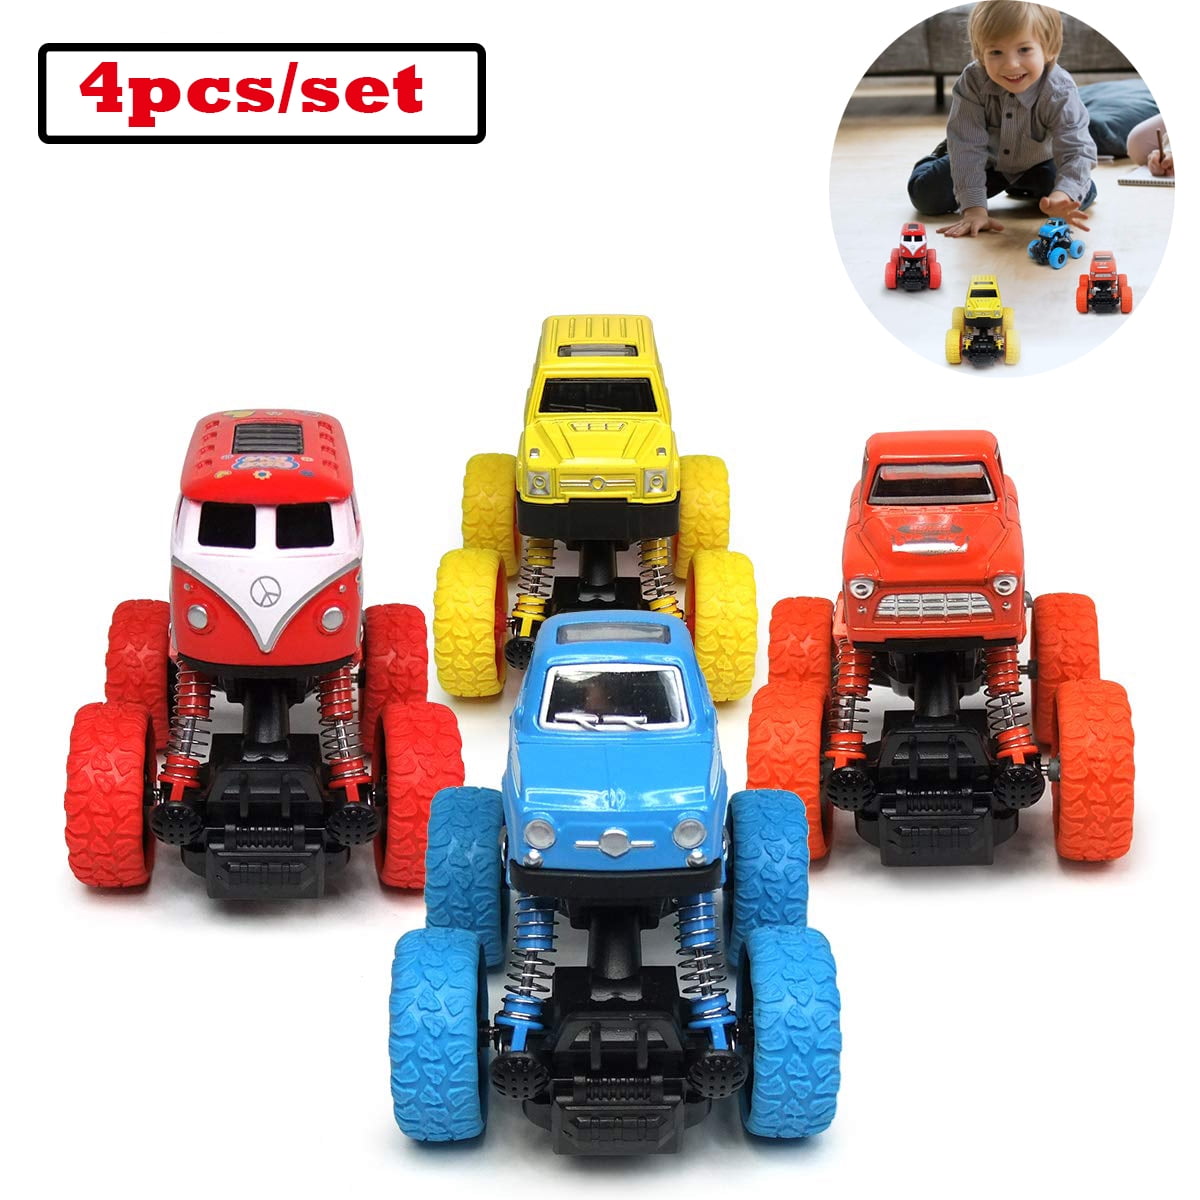 Assorted Vehicle Playsets for 1 2 Years Old 1 Truck + 2 Cars + 1 Helicopter Rlimate Wooden Toddler Toys for Boys and Girls